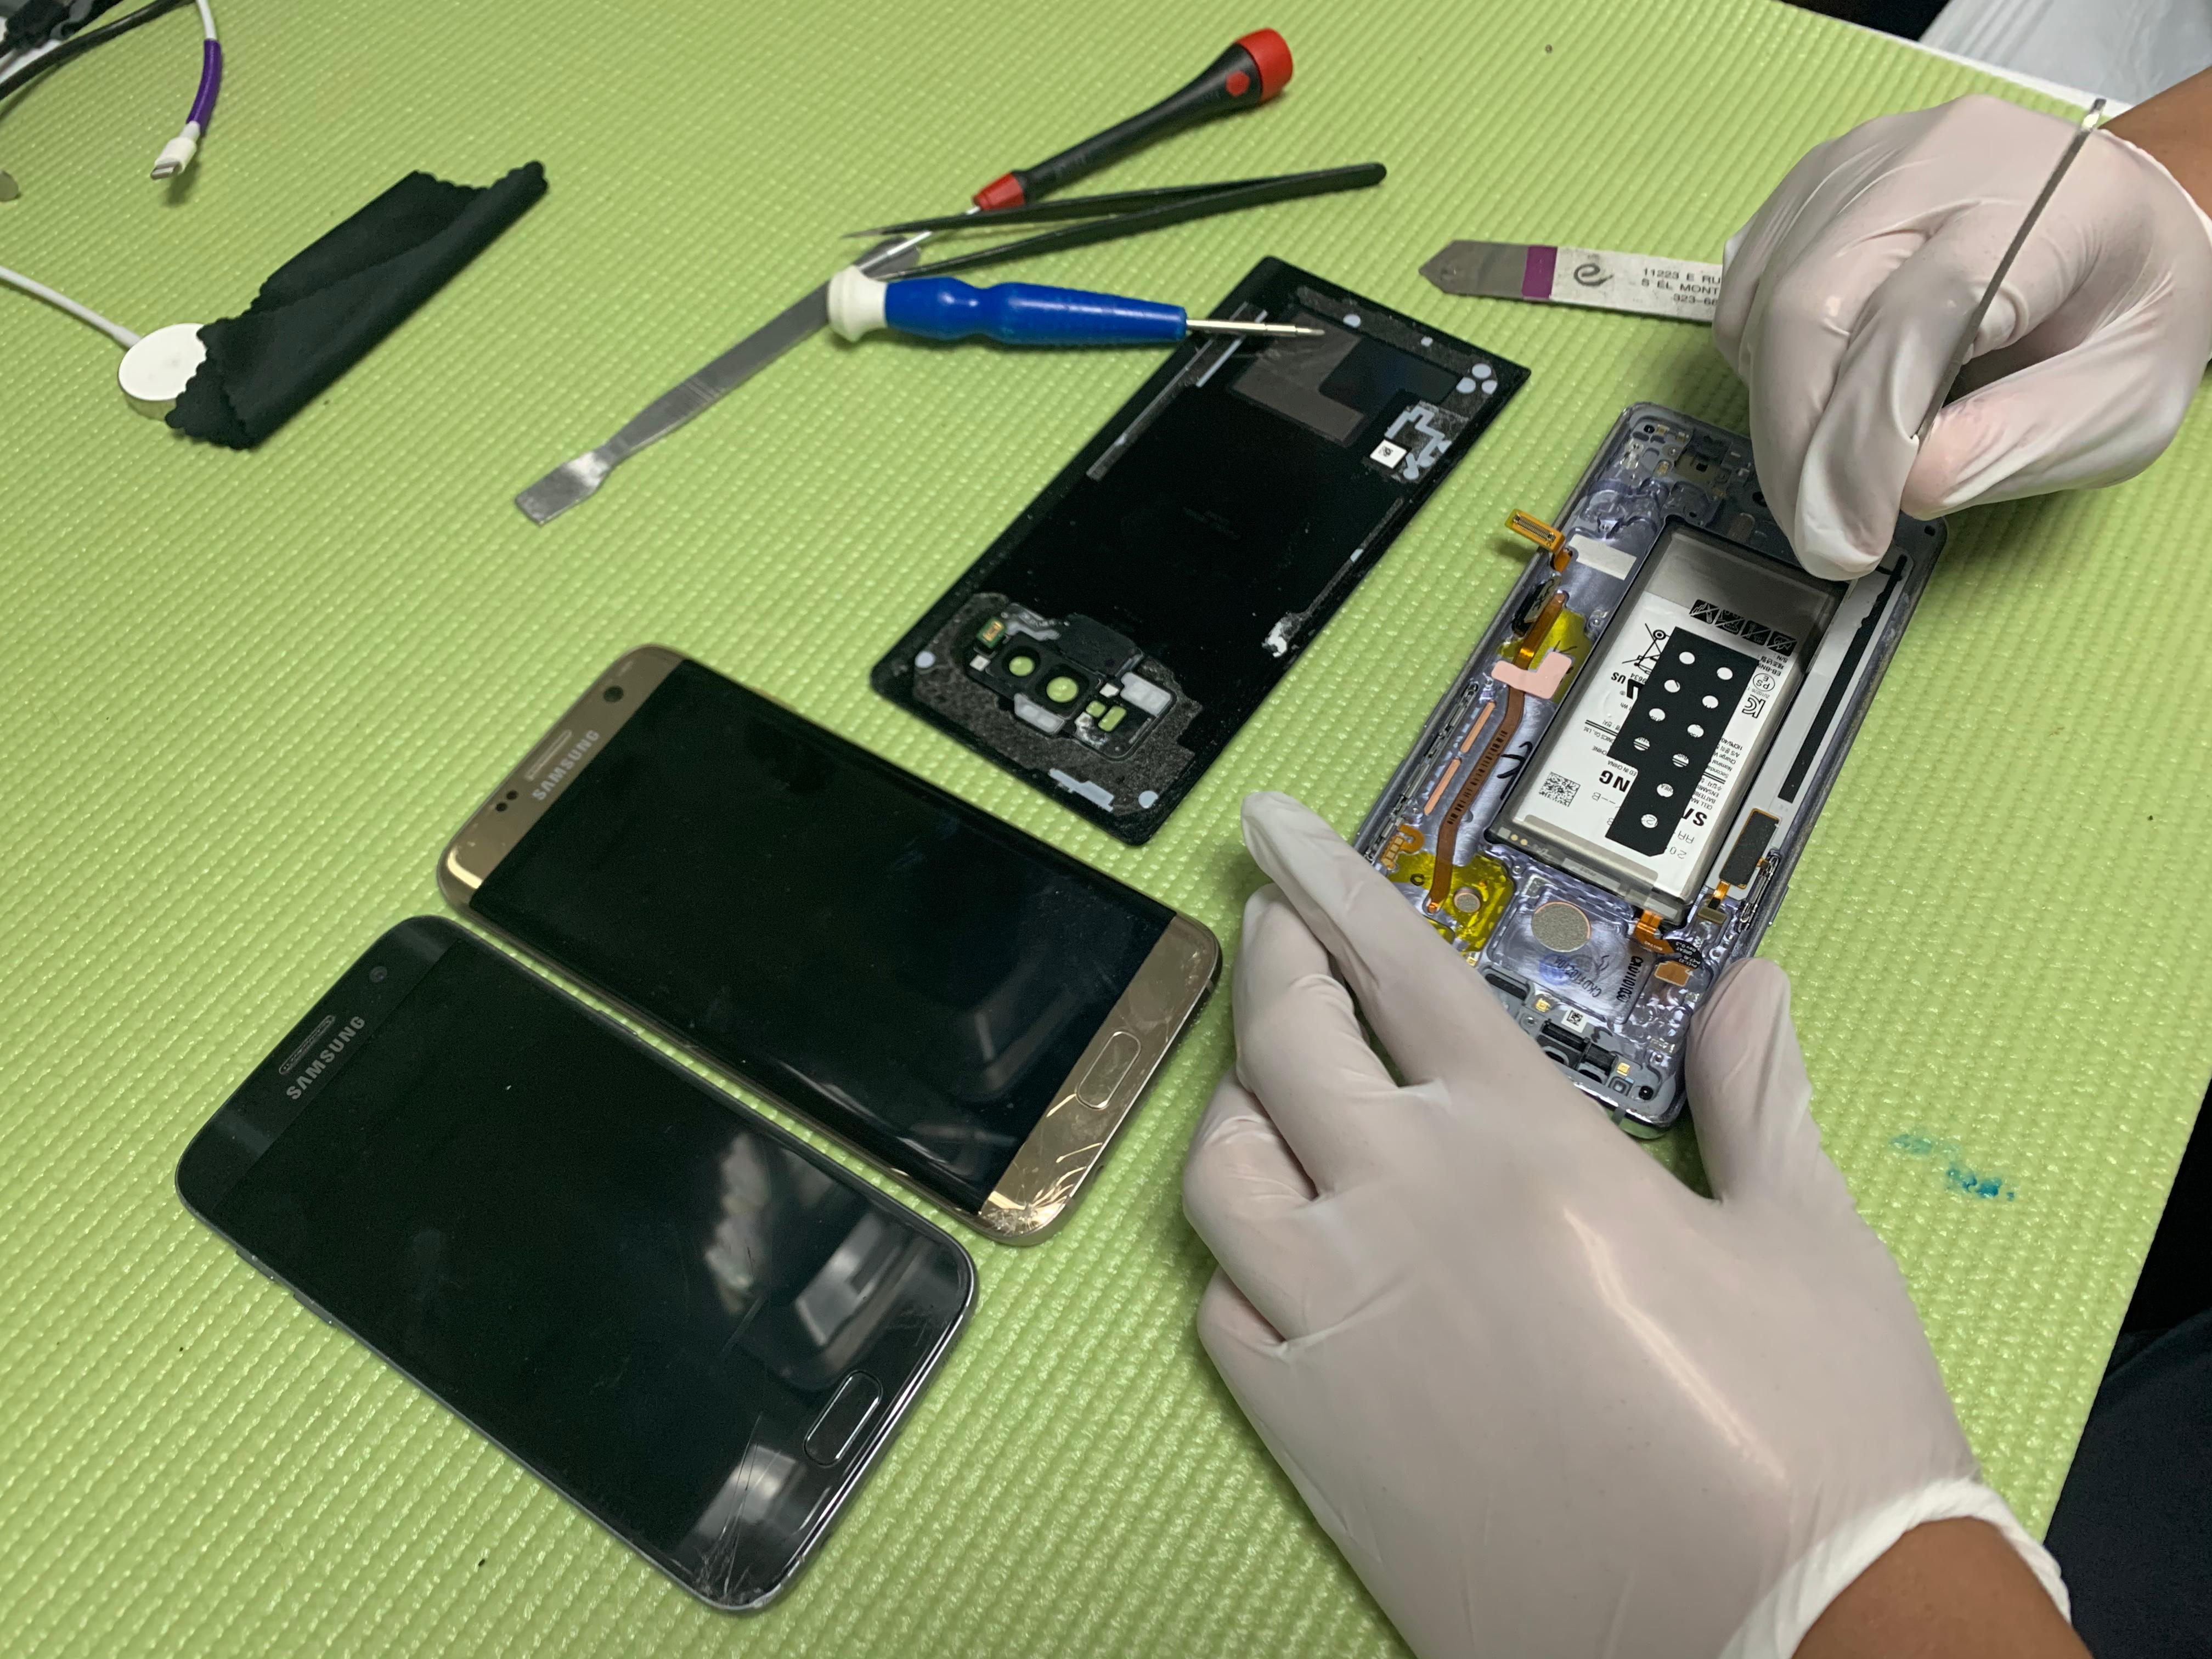 CPR Cell Phone Repair Henderson - Wireless Doctor Photo